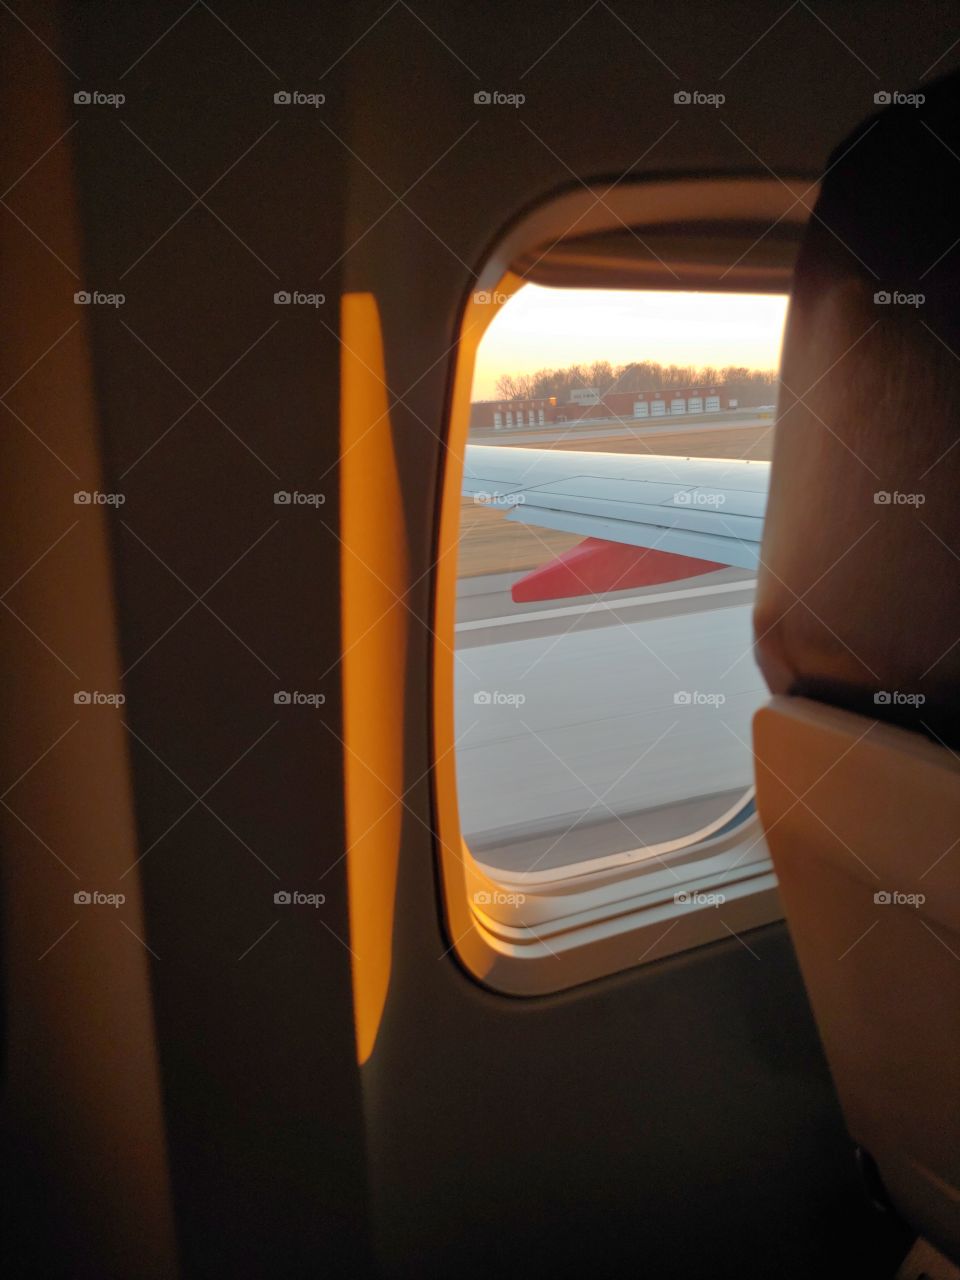 A dramatic view of the interior wall of a plane highlighted with golden sunshine, offering a glimpse of runway outside.